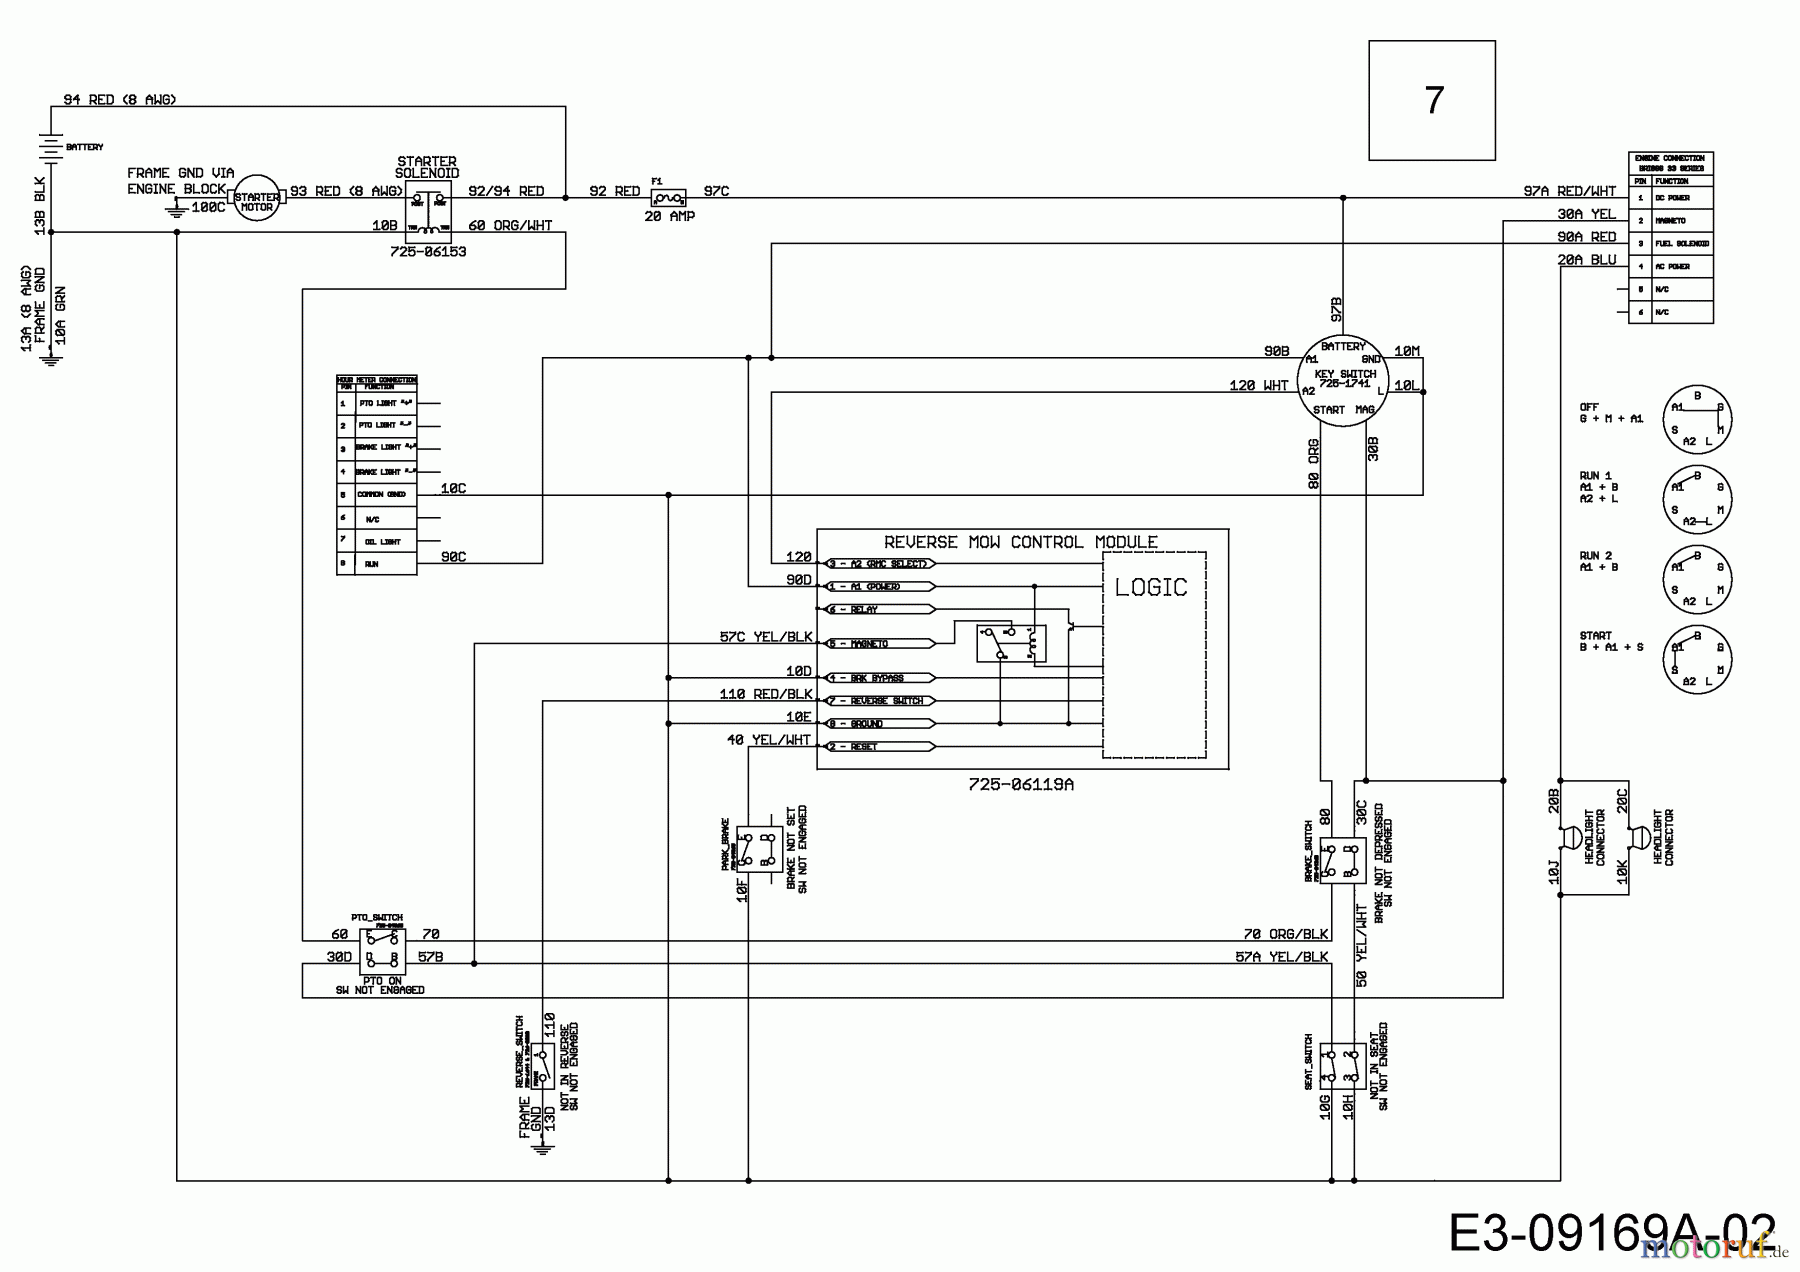  MTD Lawn tractors 20/42 Automatic 13AT785S306  (2017) Wiring diagram